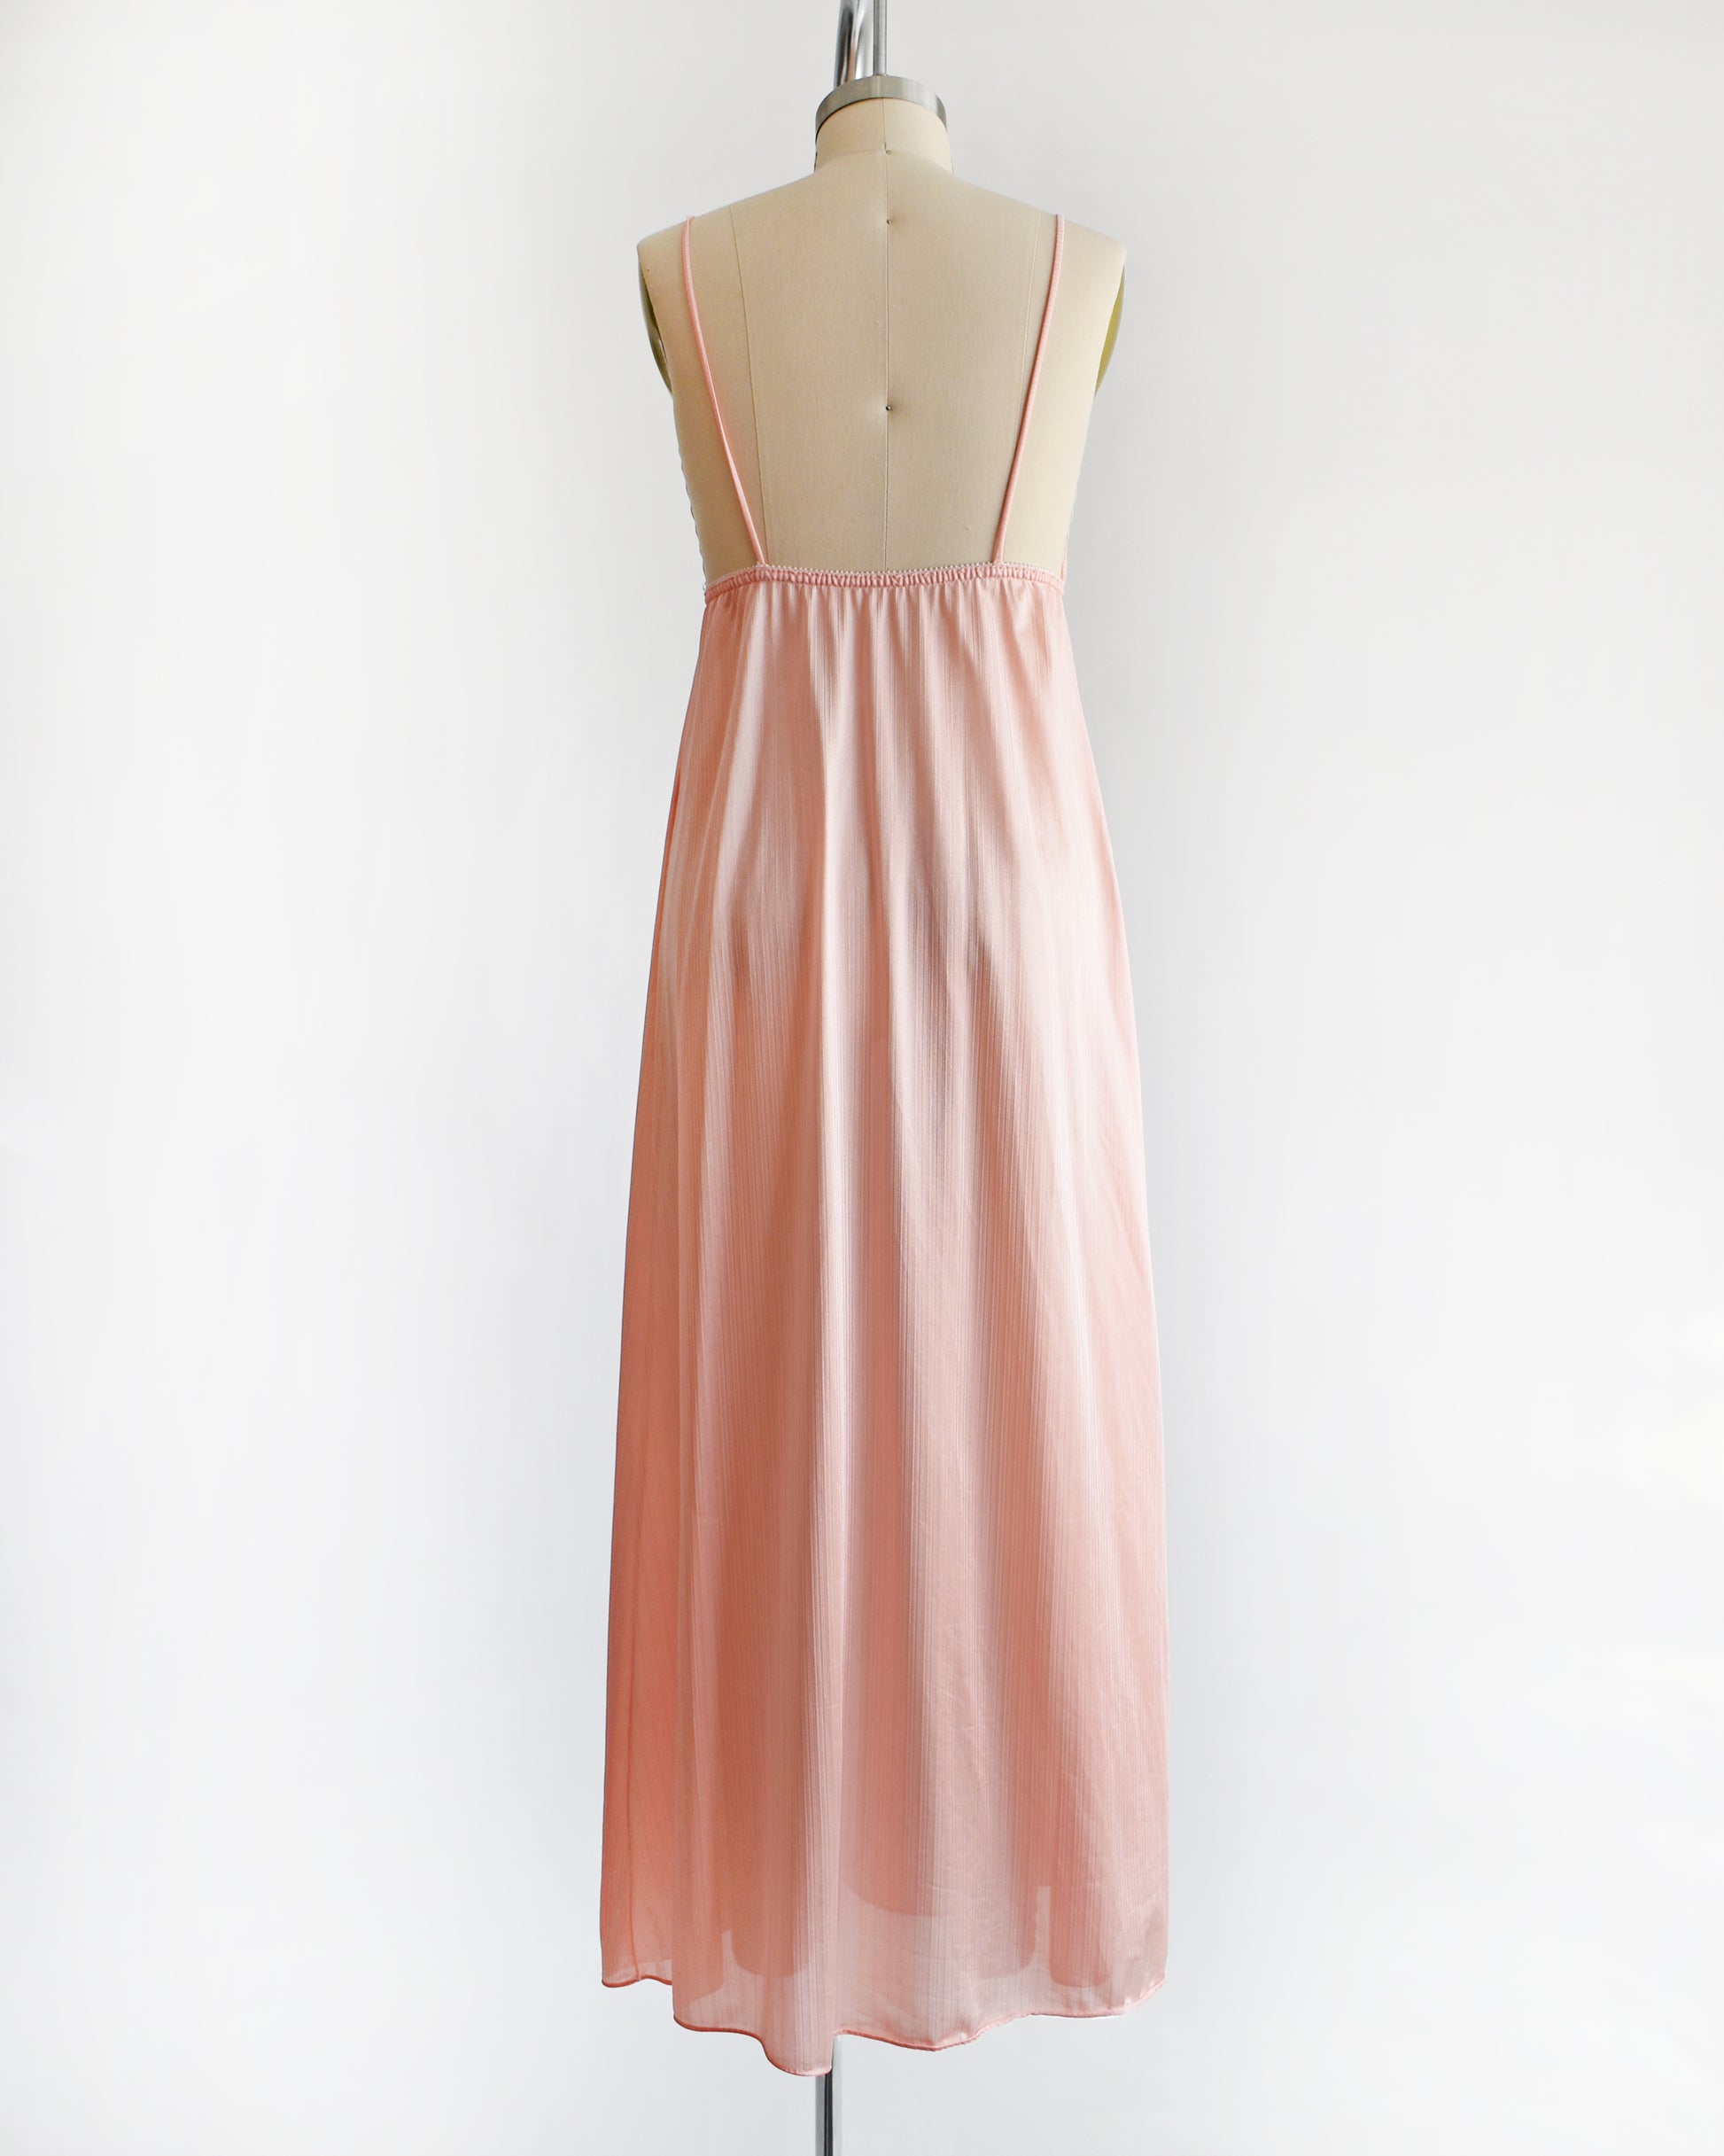 Back view of a A vintage 1970s peachy pink nightgown 